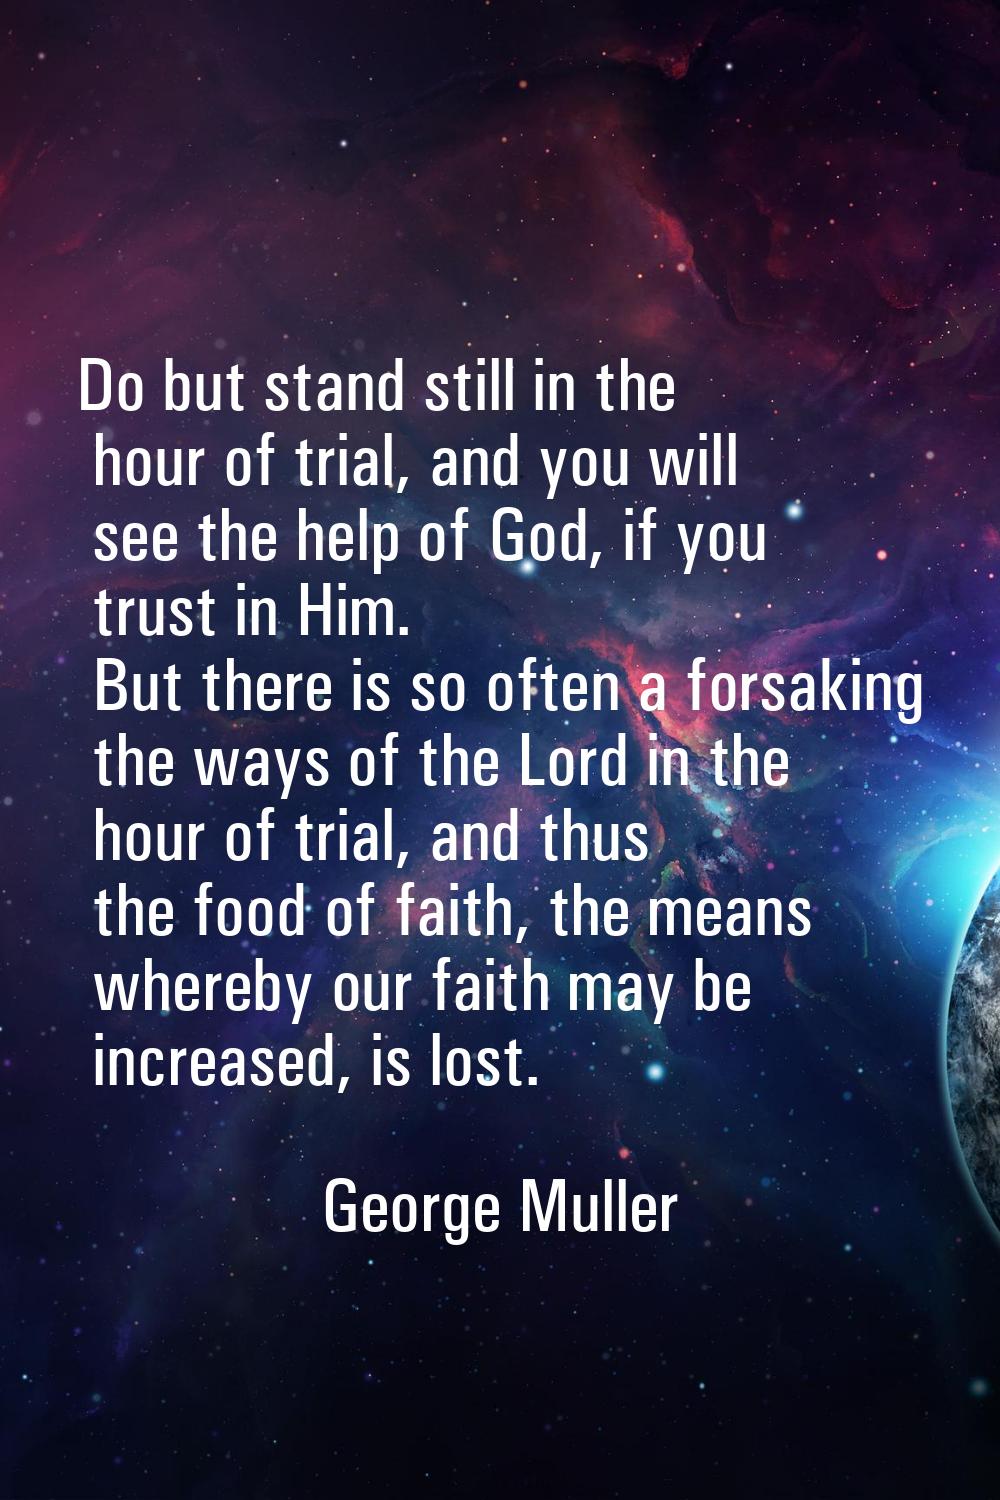 Do but stand still in the hour of trial, and you will see the help of God, if you trust in Him. But